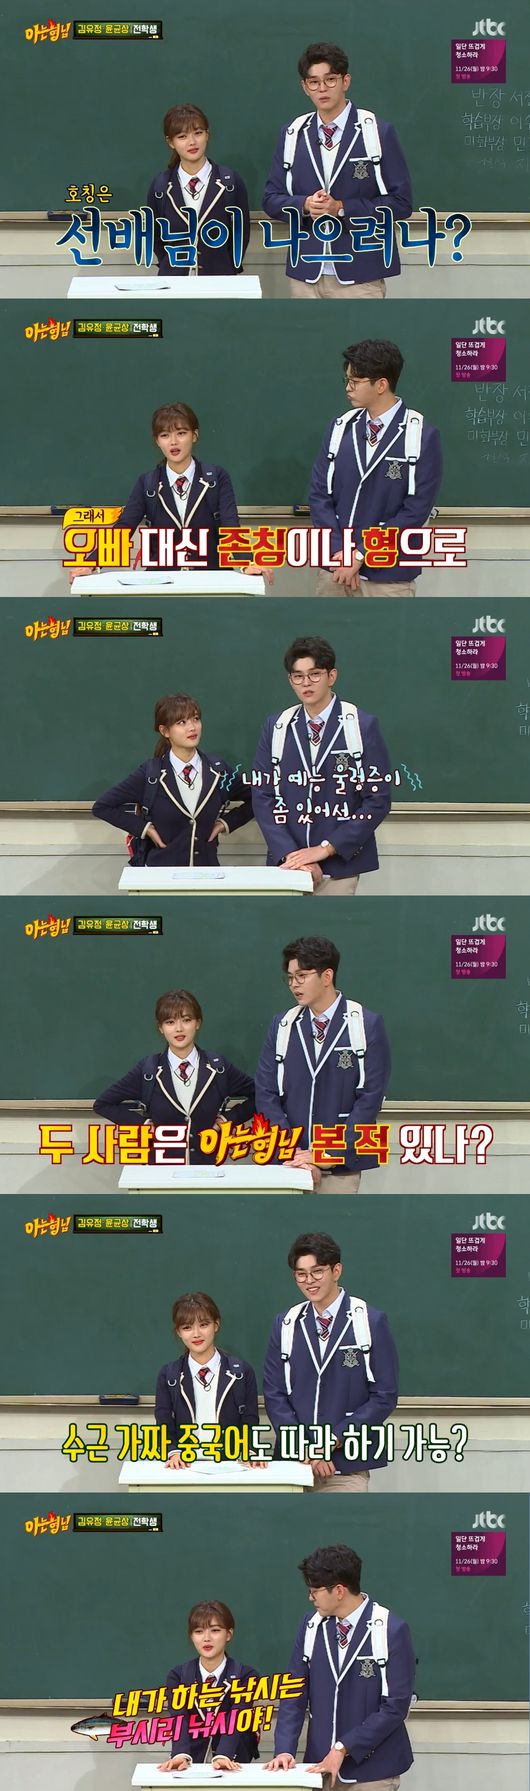 Actor Yoon Kyun-sang and Kim Yoo-jung burned the entertainment passion.On JTBC Entertainment Knowing Brother, which aired on the afternoon of the 24th, the main characters of the new monthly drama Once Clean Hot, Yoon Kyun-sang and Kim Yoo-jung, appeared.Yoon Kyun-sang said, I am older than Kim Yoo-jung, but Yu-Jeong was worried that he was a senior.I was worried about calling him senior, but Yu-Jeong came up first and said, Ill say youre my brother.Kim Yoo-jung said, Most of the time I call my brother.I was called Uncle when I was a child, but suddenly it was awkward to call me brother. I used my honor or mainly called my brother, but when I called him brother, everyone was comfortable and started to call me brother.Yoon Kyun-sang and Kim Yoo-jung then revealed that they are a big fan of Knowing Brother.I dont appear well because I have entertainment woes, but Ive seen almost all of my knowing brother, said Yoon Kyun-sang.Kim Yoo-jung also said, I saw Knowing Brother from the first time. I do not see the original entertainment well.Thats my brother, I know.Kim Yoo-jung went on to say, One day I dreamt of a knowing brother, and Kang Ho-dong suddenly appeared in my dream and shouted the buzzword of the time, Sweg.I really liked it, so I dreamed it and felt so good.The members of the Knowing Brother compared Kang Ho-dong to Pig, saying, Why did you buy the lottery that day?Yoon Kyun-sang also said, I dreamed of knowing brother the day before.I fell asleep on the side of Super Junior, but my story was not so fun in the dream atmosphere.  Then Kang Ho-dong suddenly called me separately and said, Do your Dandy.Its not a dream, its a dream, its a dream, Kim recalled, and laughed at everyone by saying, It can happen today.Yu-Jeong is mature despite being the same age as me, said Yoon Kyun-sang, referring to Kim Yoo-jung.Kim Yoo-jung said, I liked fishing, so I went out on a boat and caught bluefin tuna and Bushley.Its a shame that I cant go because Im shooting a drama these days, he said.He said he had caught Lee Soo-geuns tall Bushley, which made his ears doubtful.Kim Yoo-jung said, Friends call me Hogu.I liked to buy tteokbokki or rice to friends from a young age, but I like to eat together, he said.I was expecting a lot of things today, and I wanted to see the gag of Su-geun, who was only watching TV, so I wish I could do a three-way poem in my name today, he said.Lee Soo-geun showed the sense of making up the three-way poem on the spot.On the other hand, Yoon Kyun-sang said, When I shot Pinocchio, I had Lee Jong-seoks shoulder, and the friend said it was humiliating.The stalagmites are taller at 187cm, and I am bigger, so I wanted to be shouldered by Seo Jang-hoon today. The height of the Yoon Kyun-sang is 191cm.So Seo Jang-hoon approached him and gave him a friendly shoulder. Yoon Kyun-sang smiled pleasantly, saying, It feels new.Capture the broadcast screen of Knowing Brother